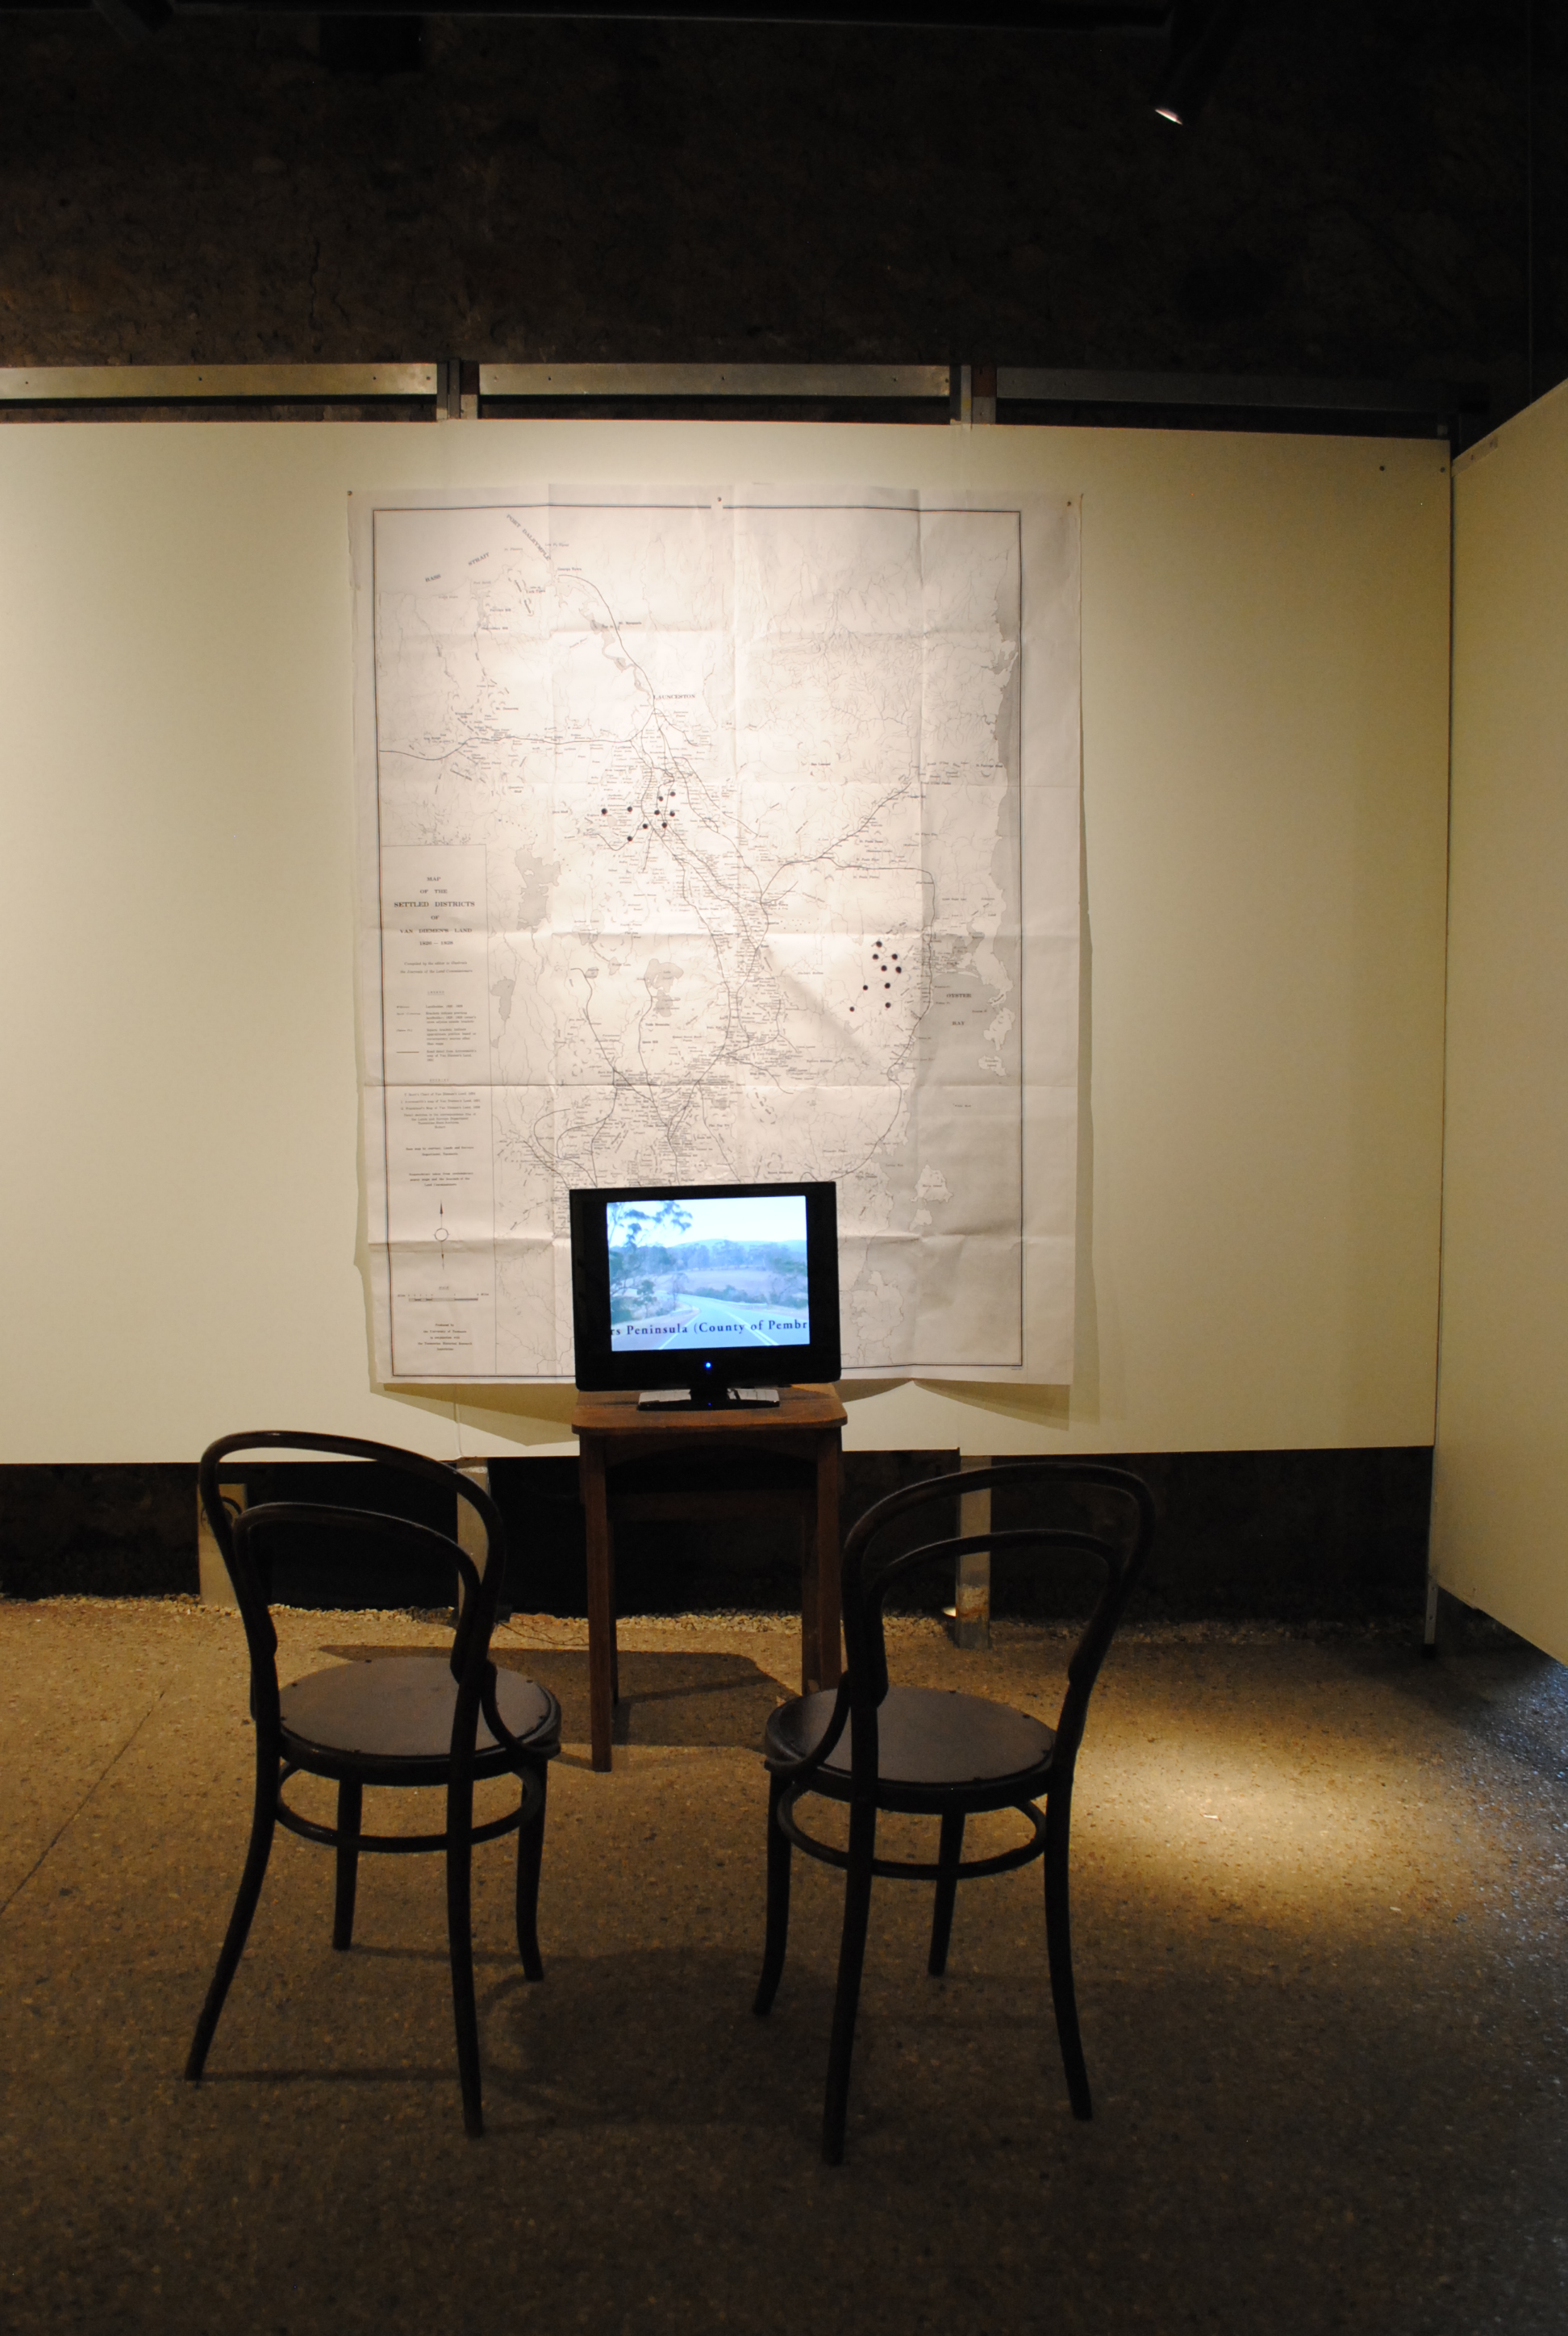 Chairs, table with television monitor playing video, map installed on wall